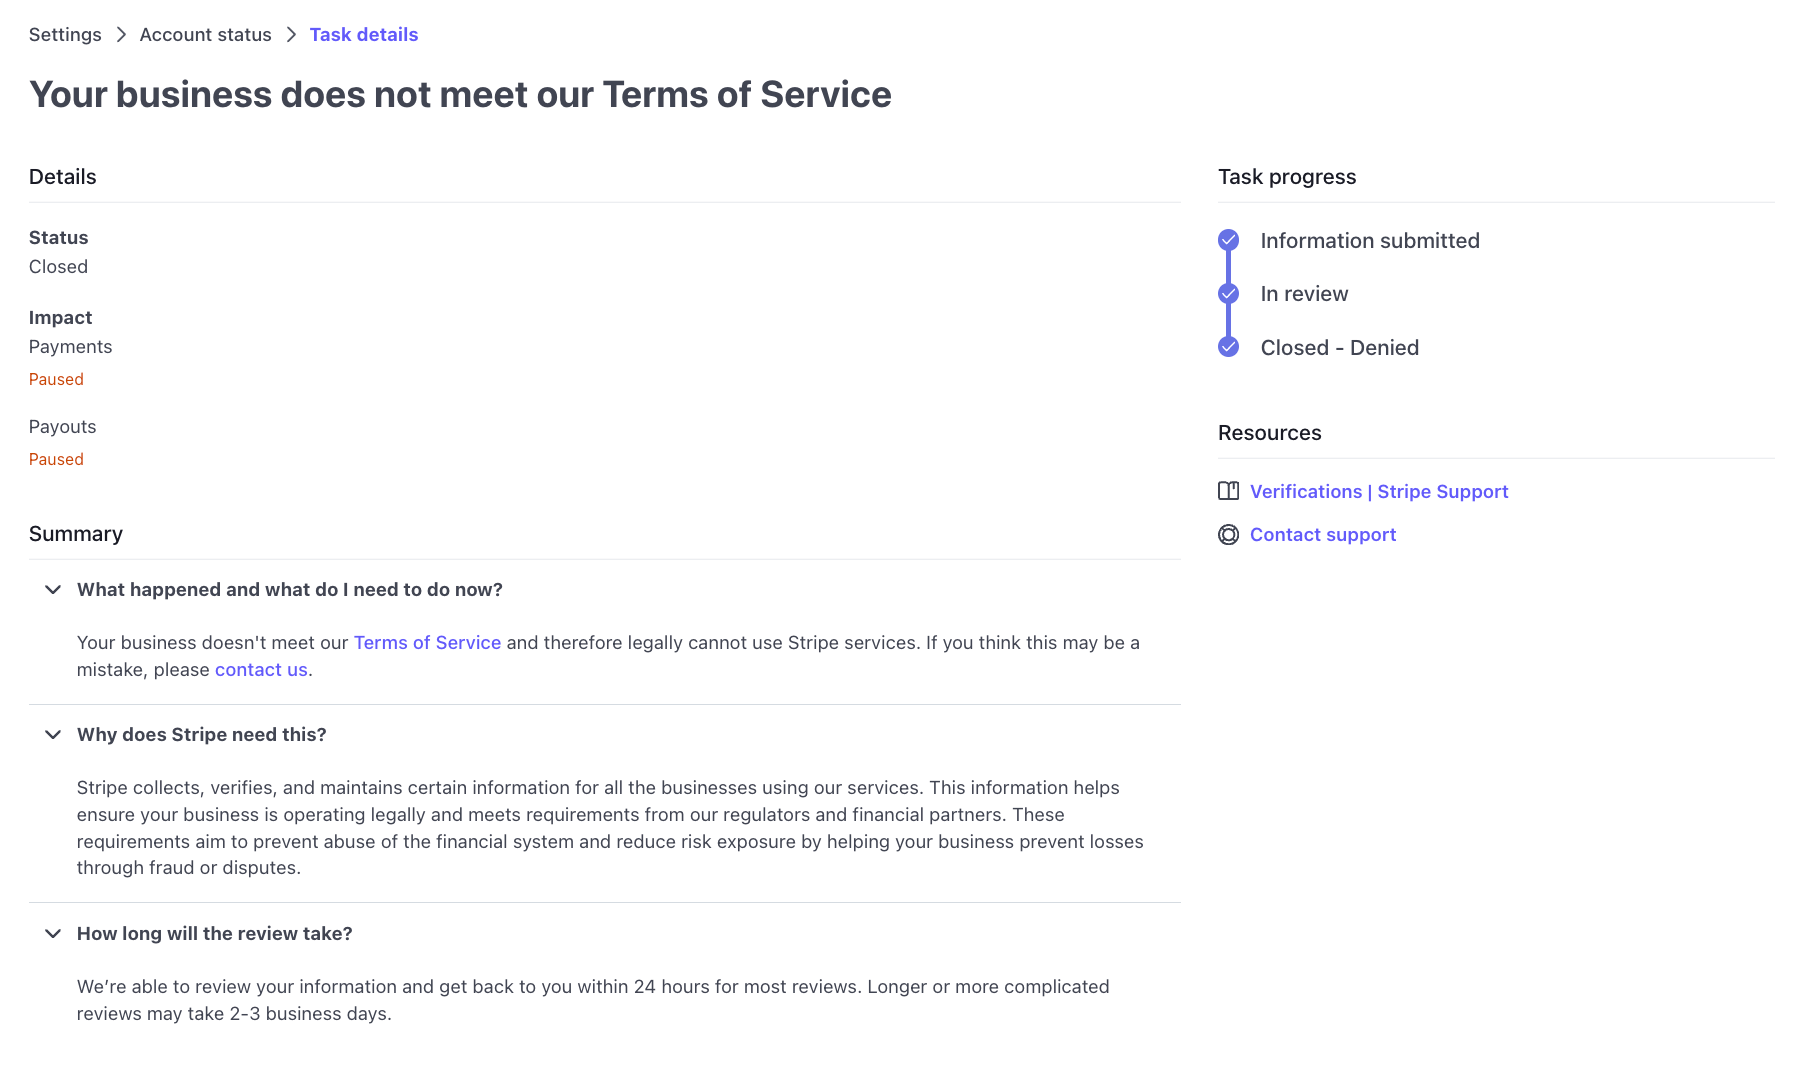 Screenshot from Stripe indicating we do not meet their Terms of Service